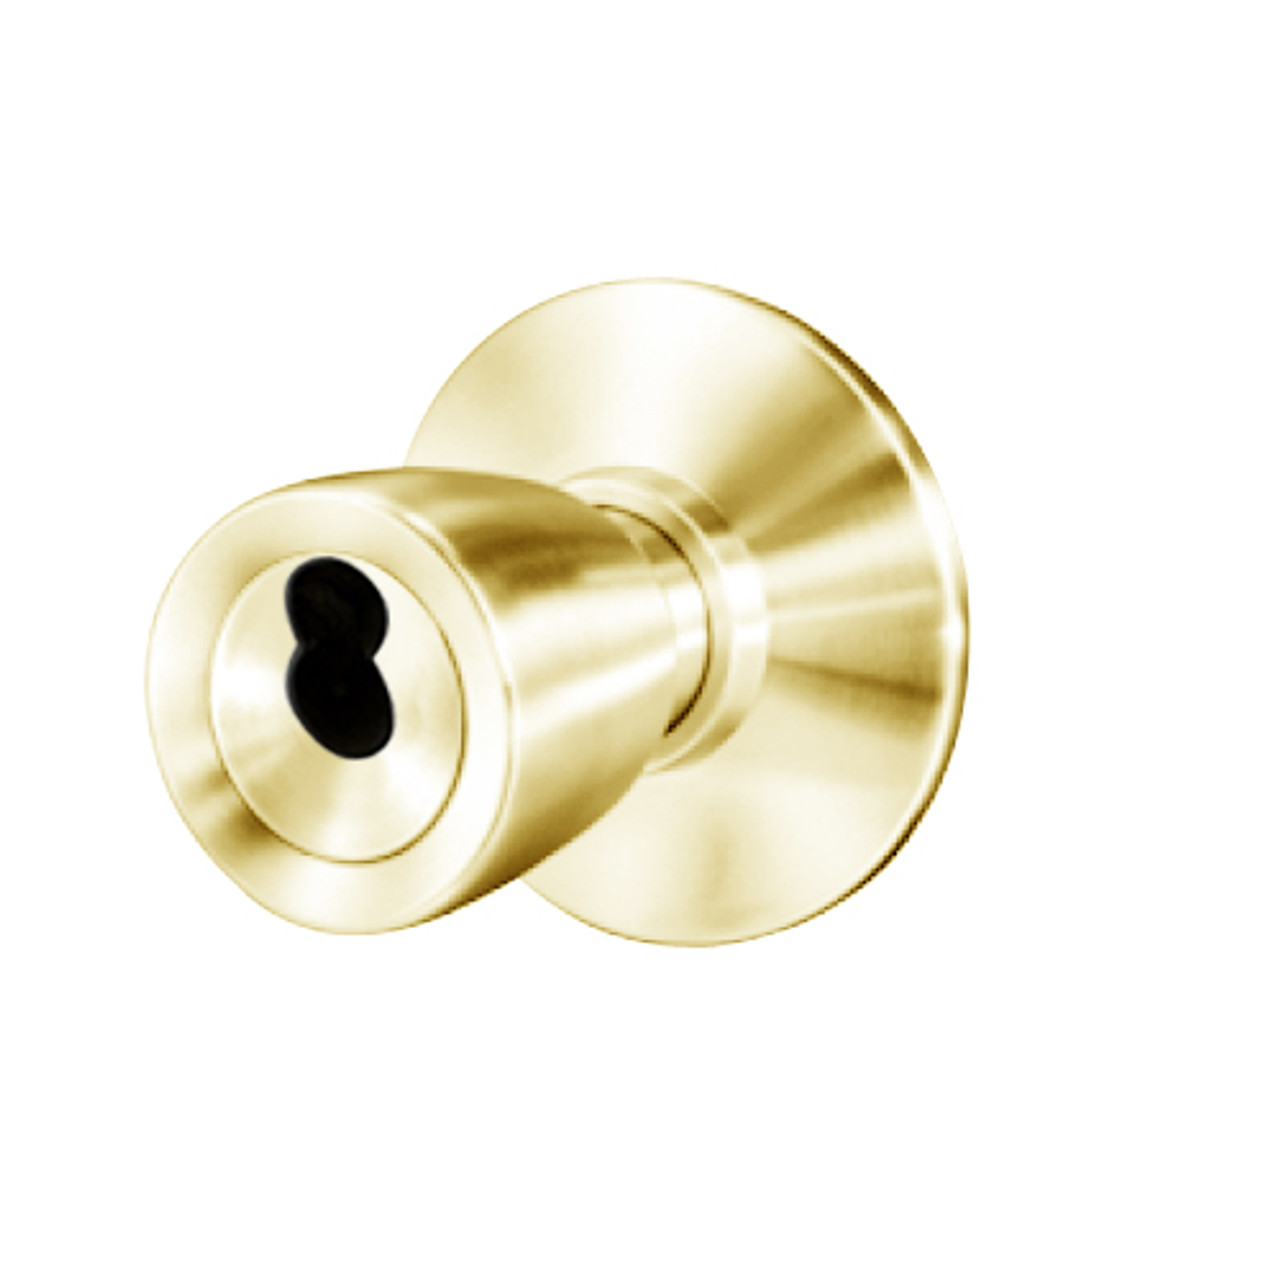 8K57YD6DS3605 Best 8K Series Exit Heavy Duty Cylindrical Knob Locks with Tulip Style in Bright Brass